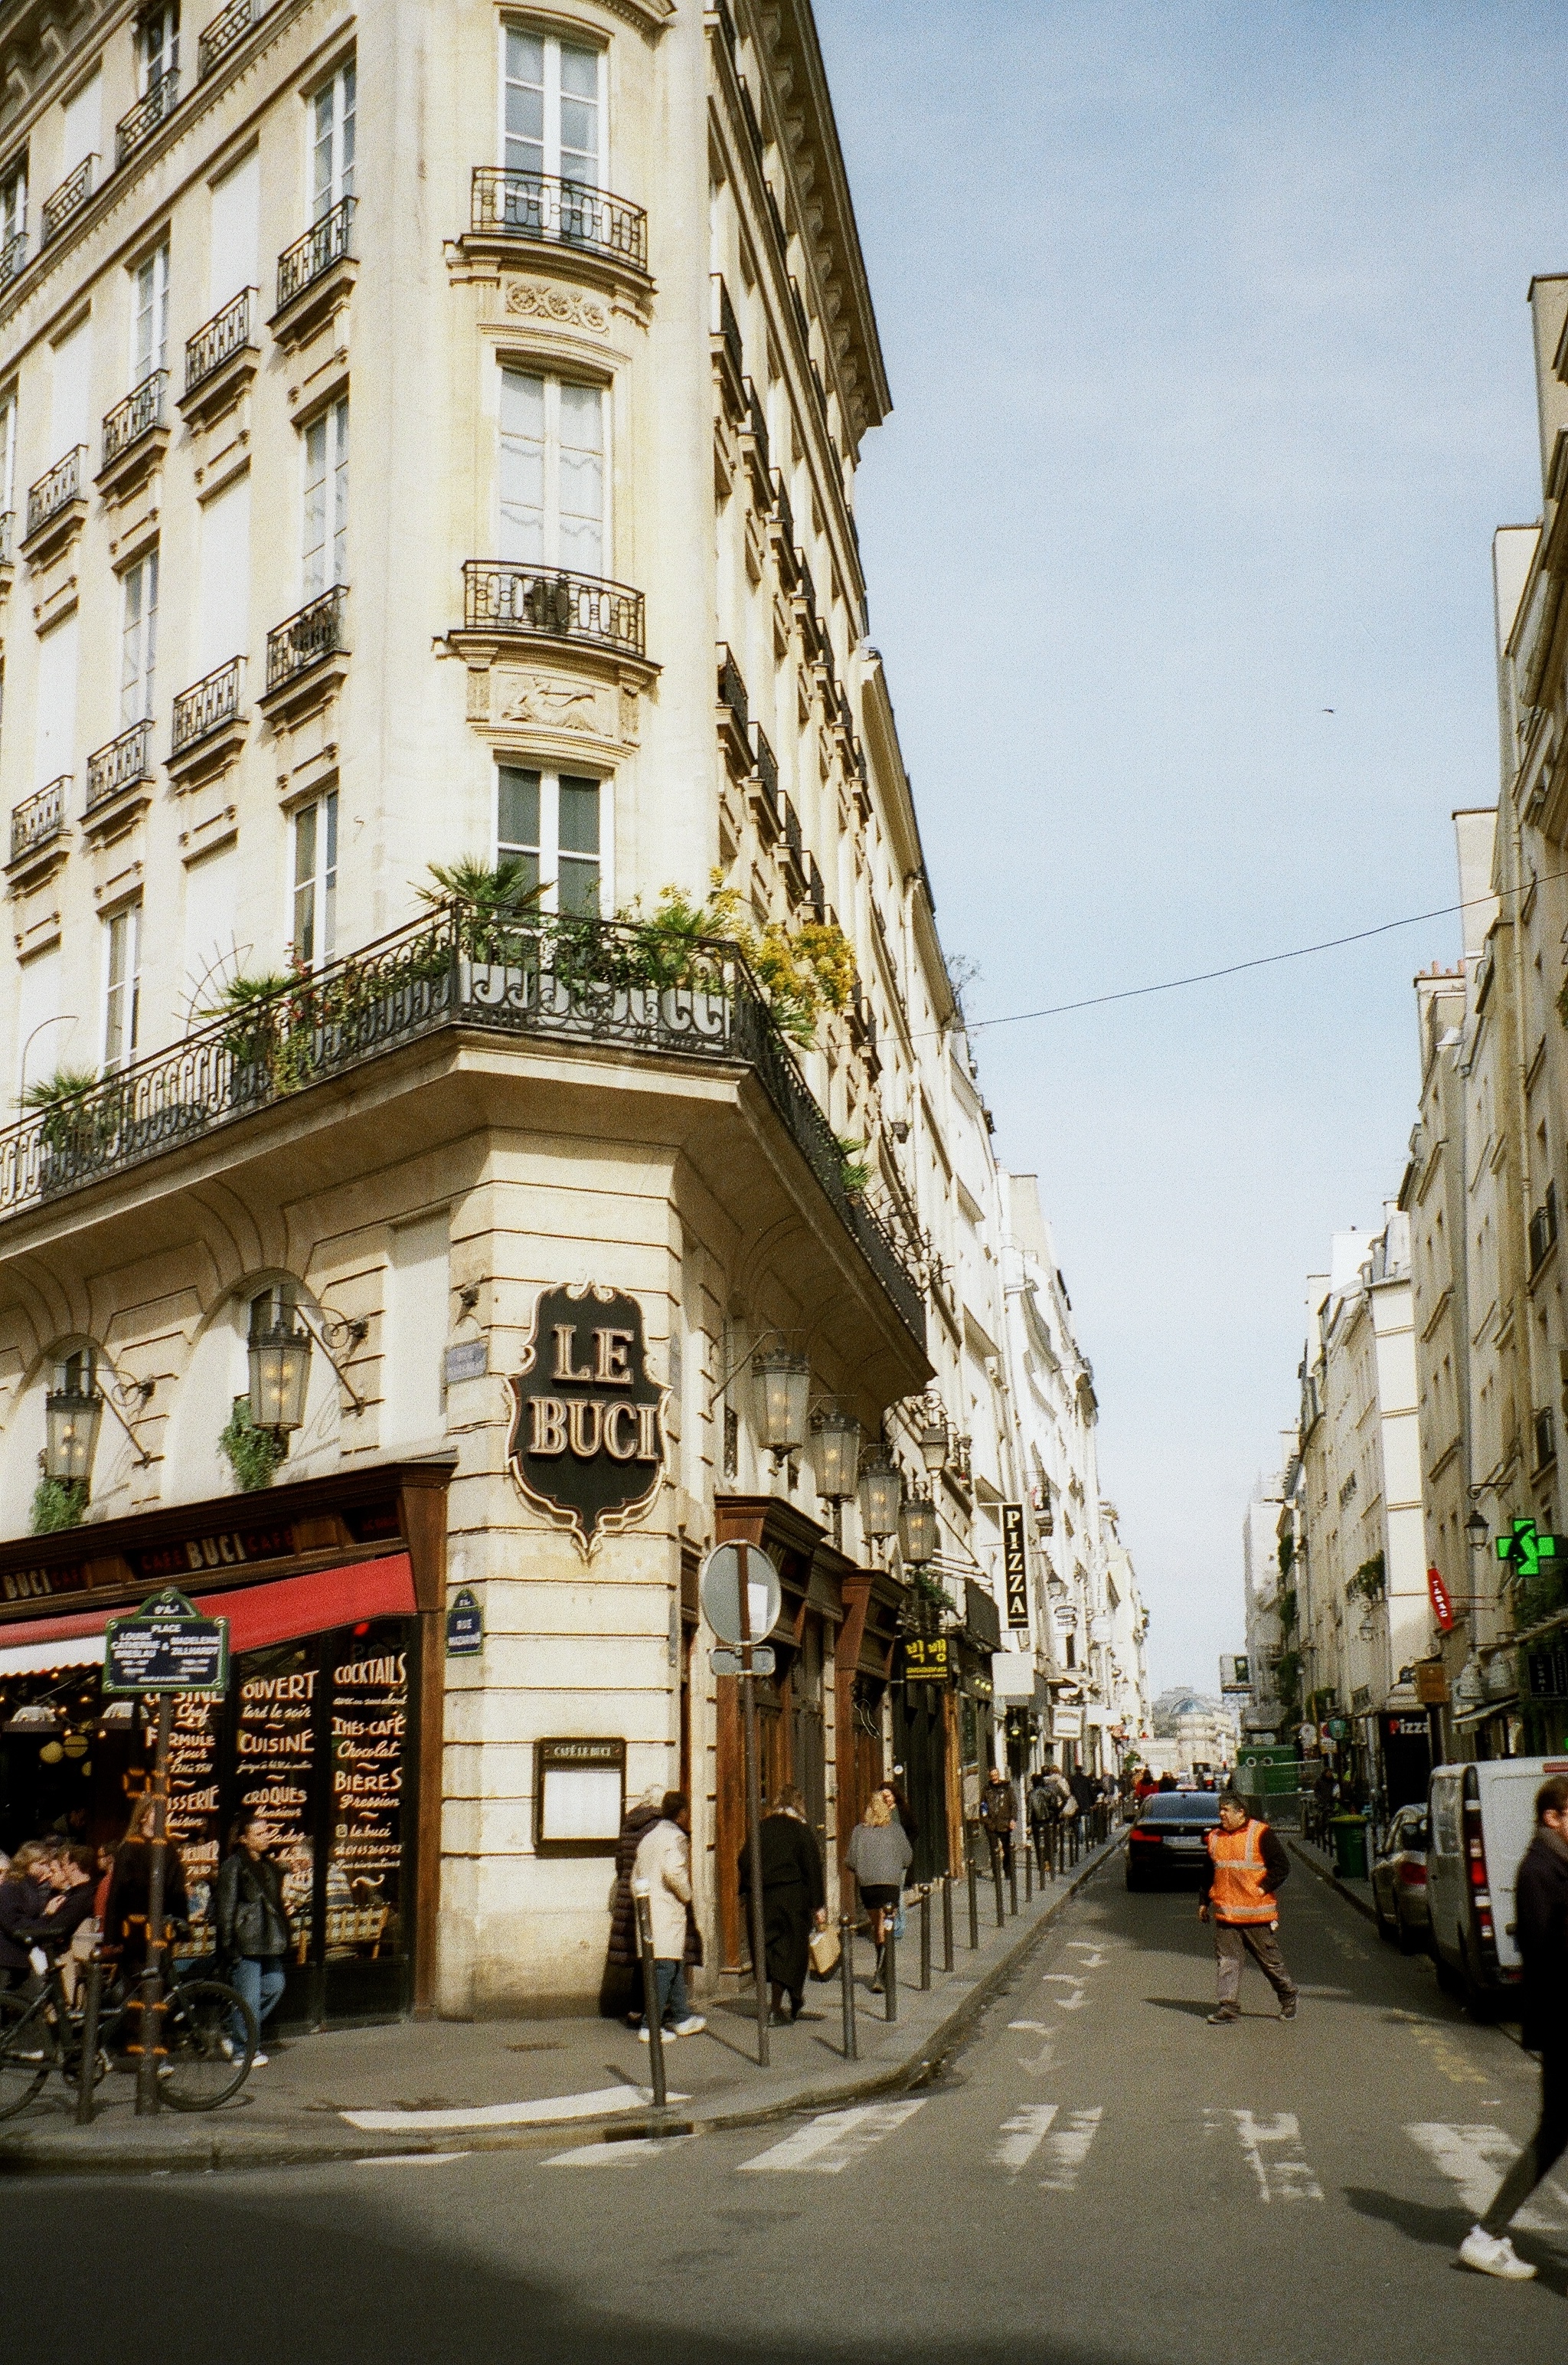 The image depicts a cafe on a corner of a cobblestone street in paris. The cafe has a bright red awning with a script logo. the street past it has many european style buildings.